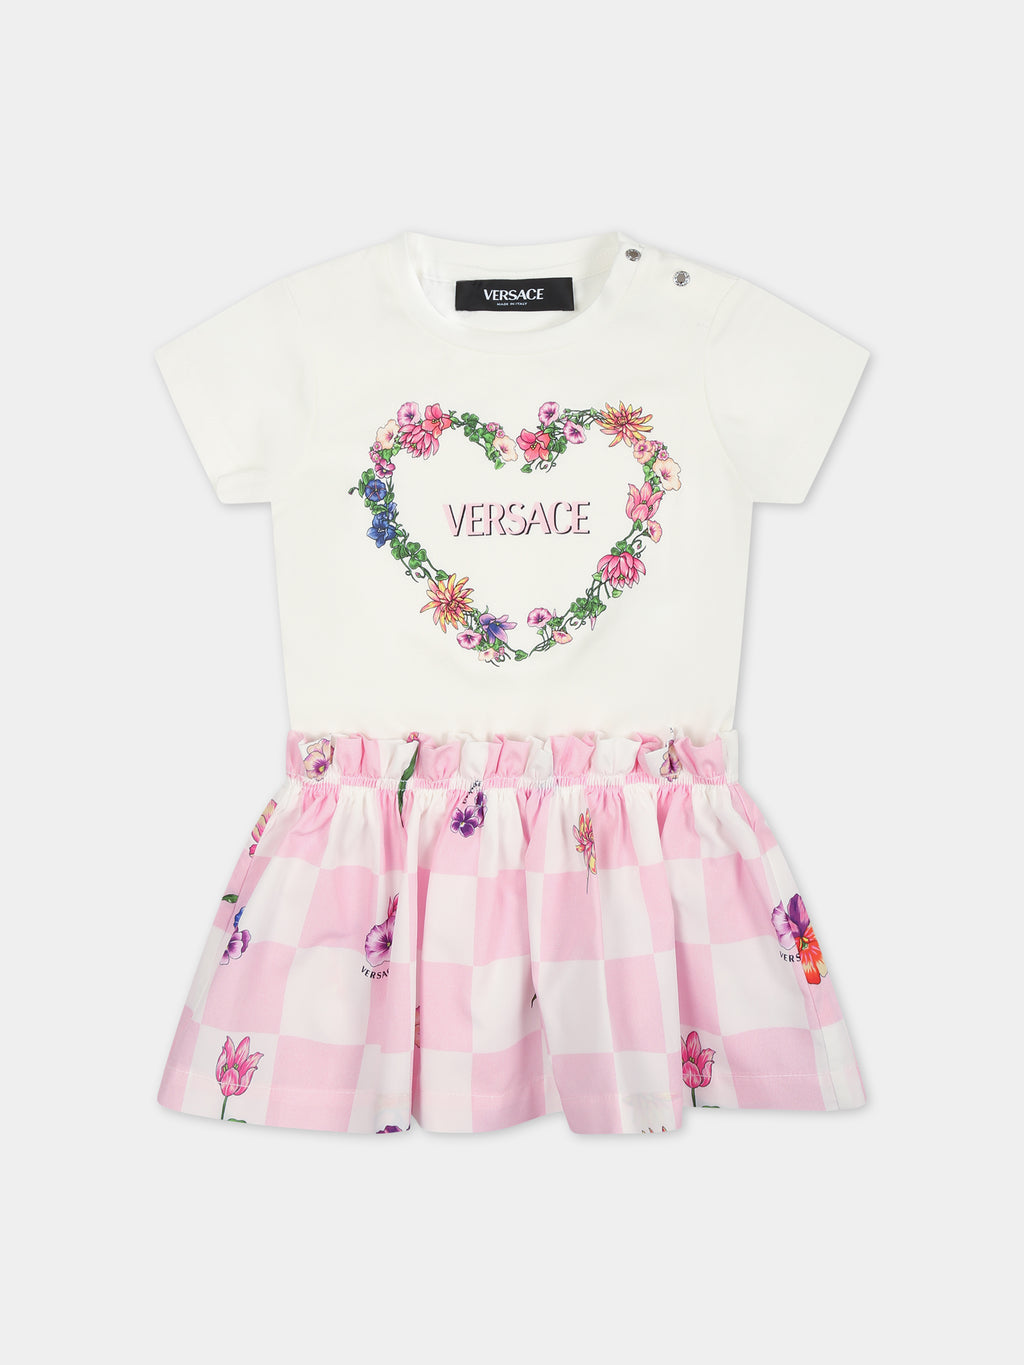 White dress for baby girl with multicolor print